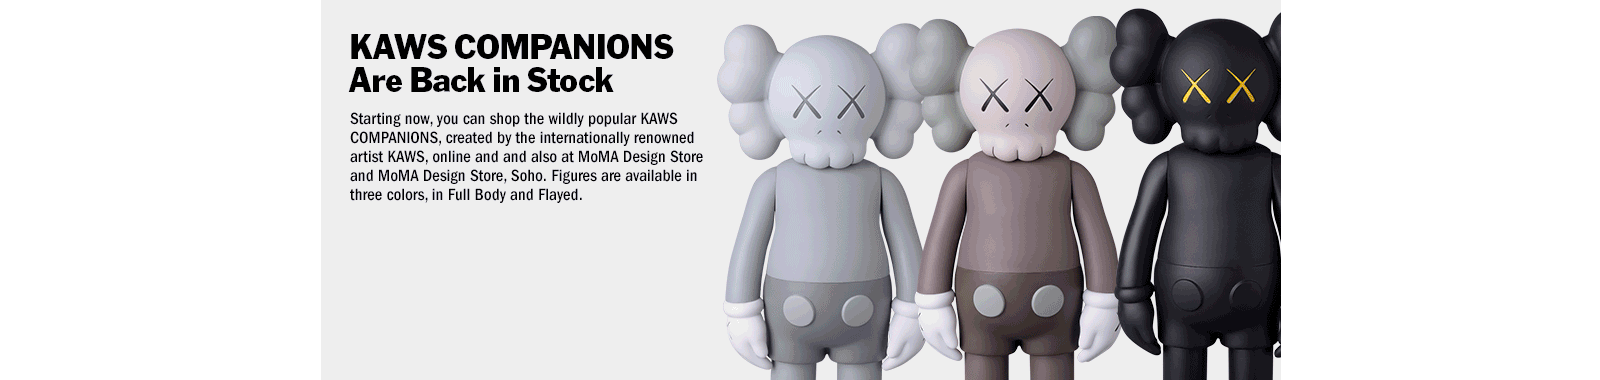 The Toy Chronicle | More KAWS Open Edition Companions at MoMA!